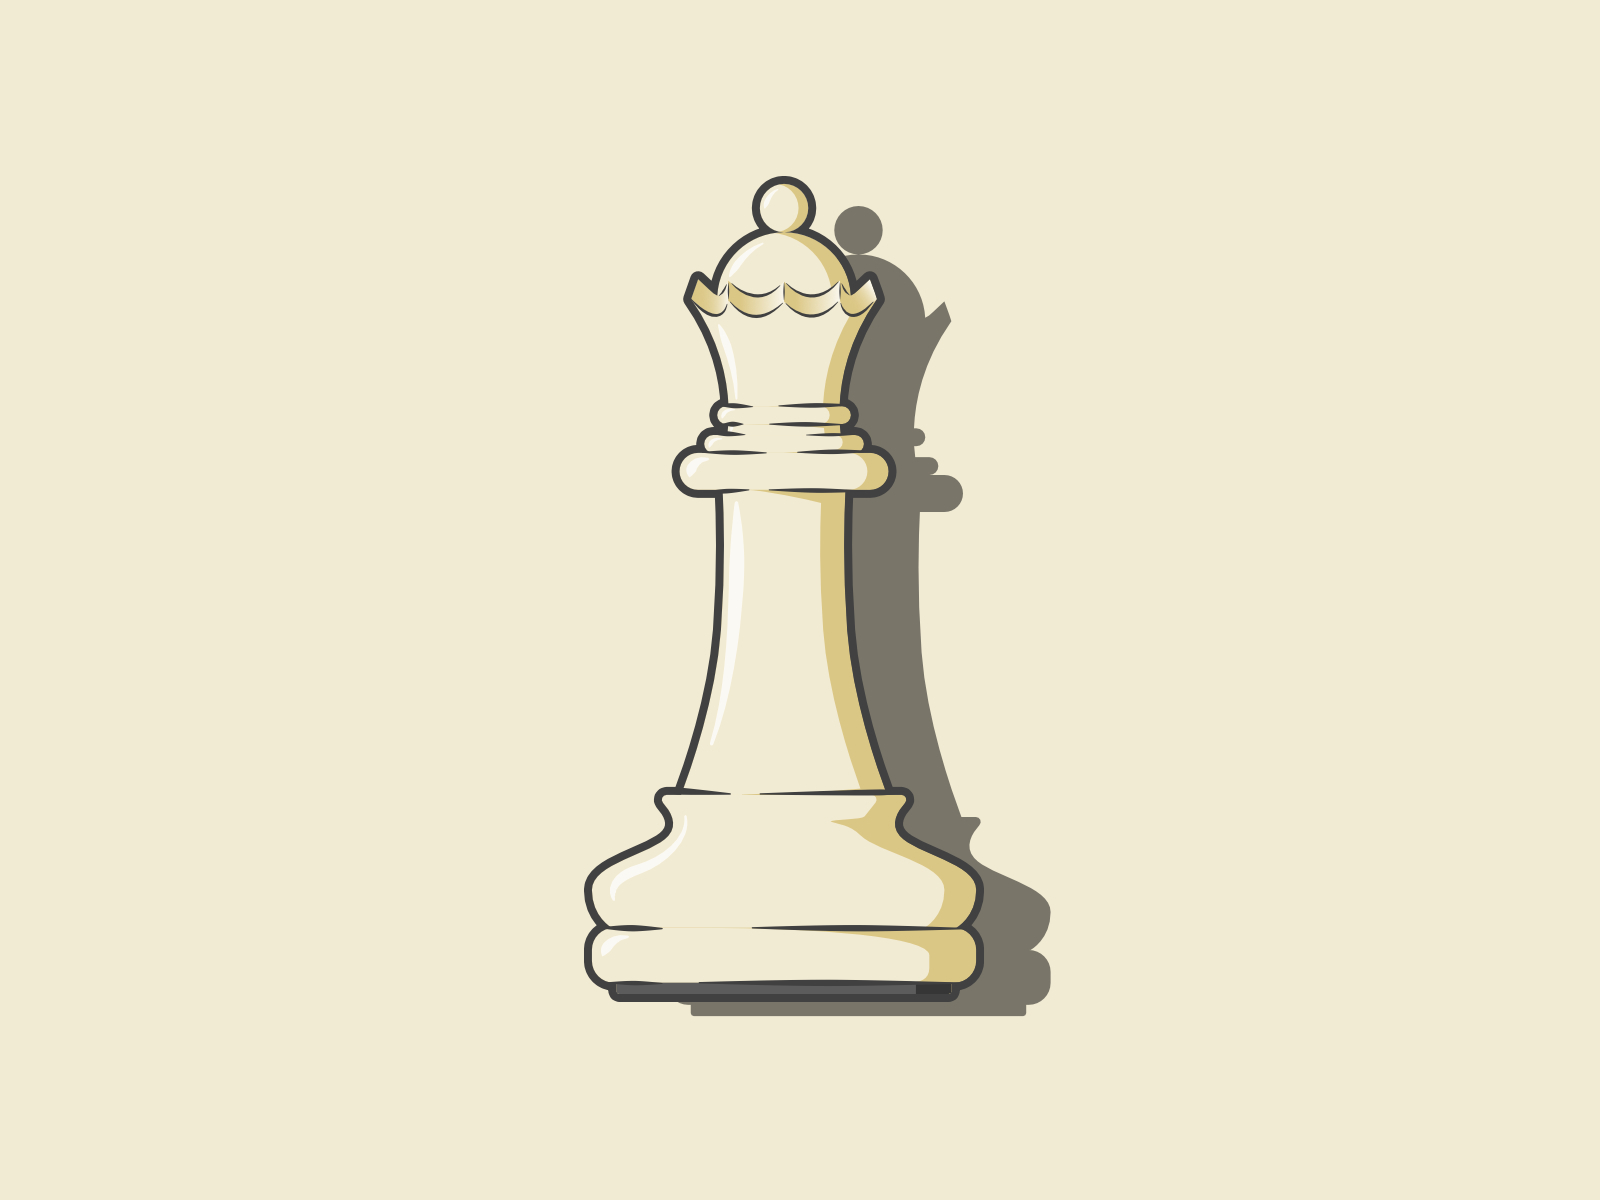 Chess Queen by Genewal Design on Dribbble